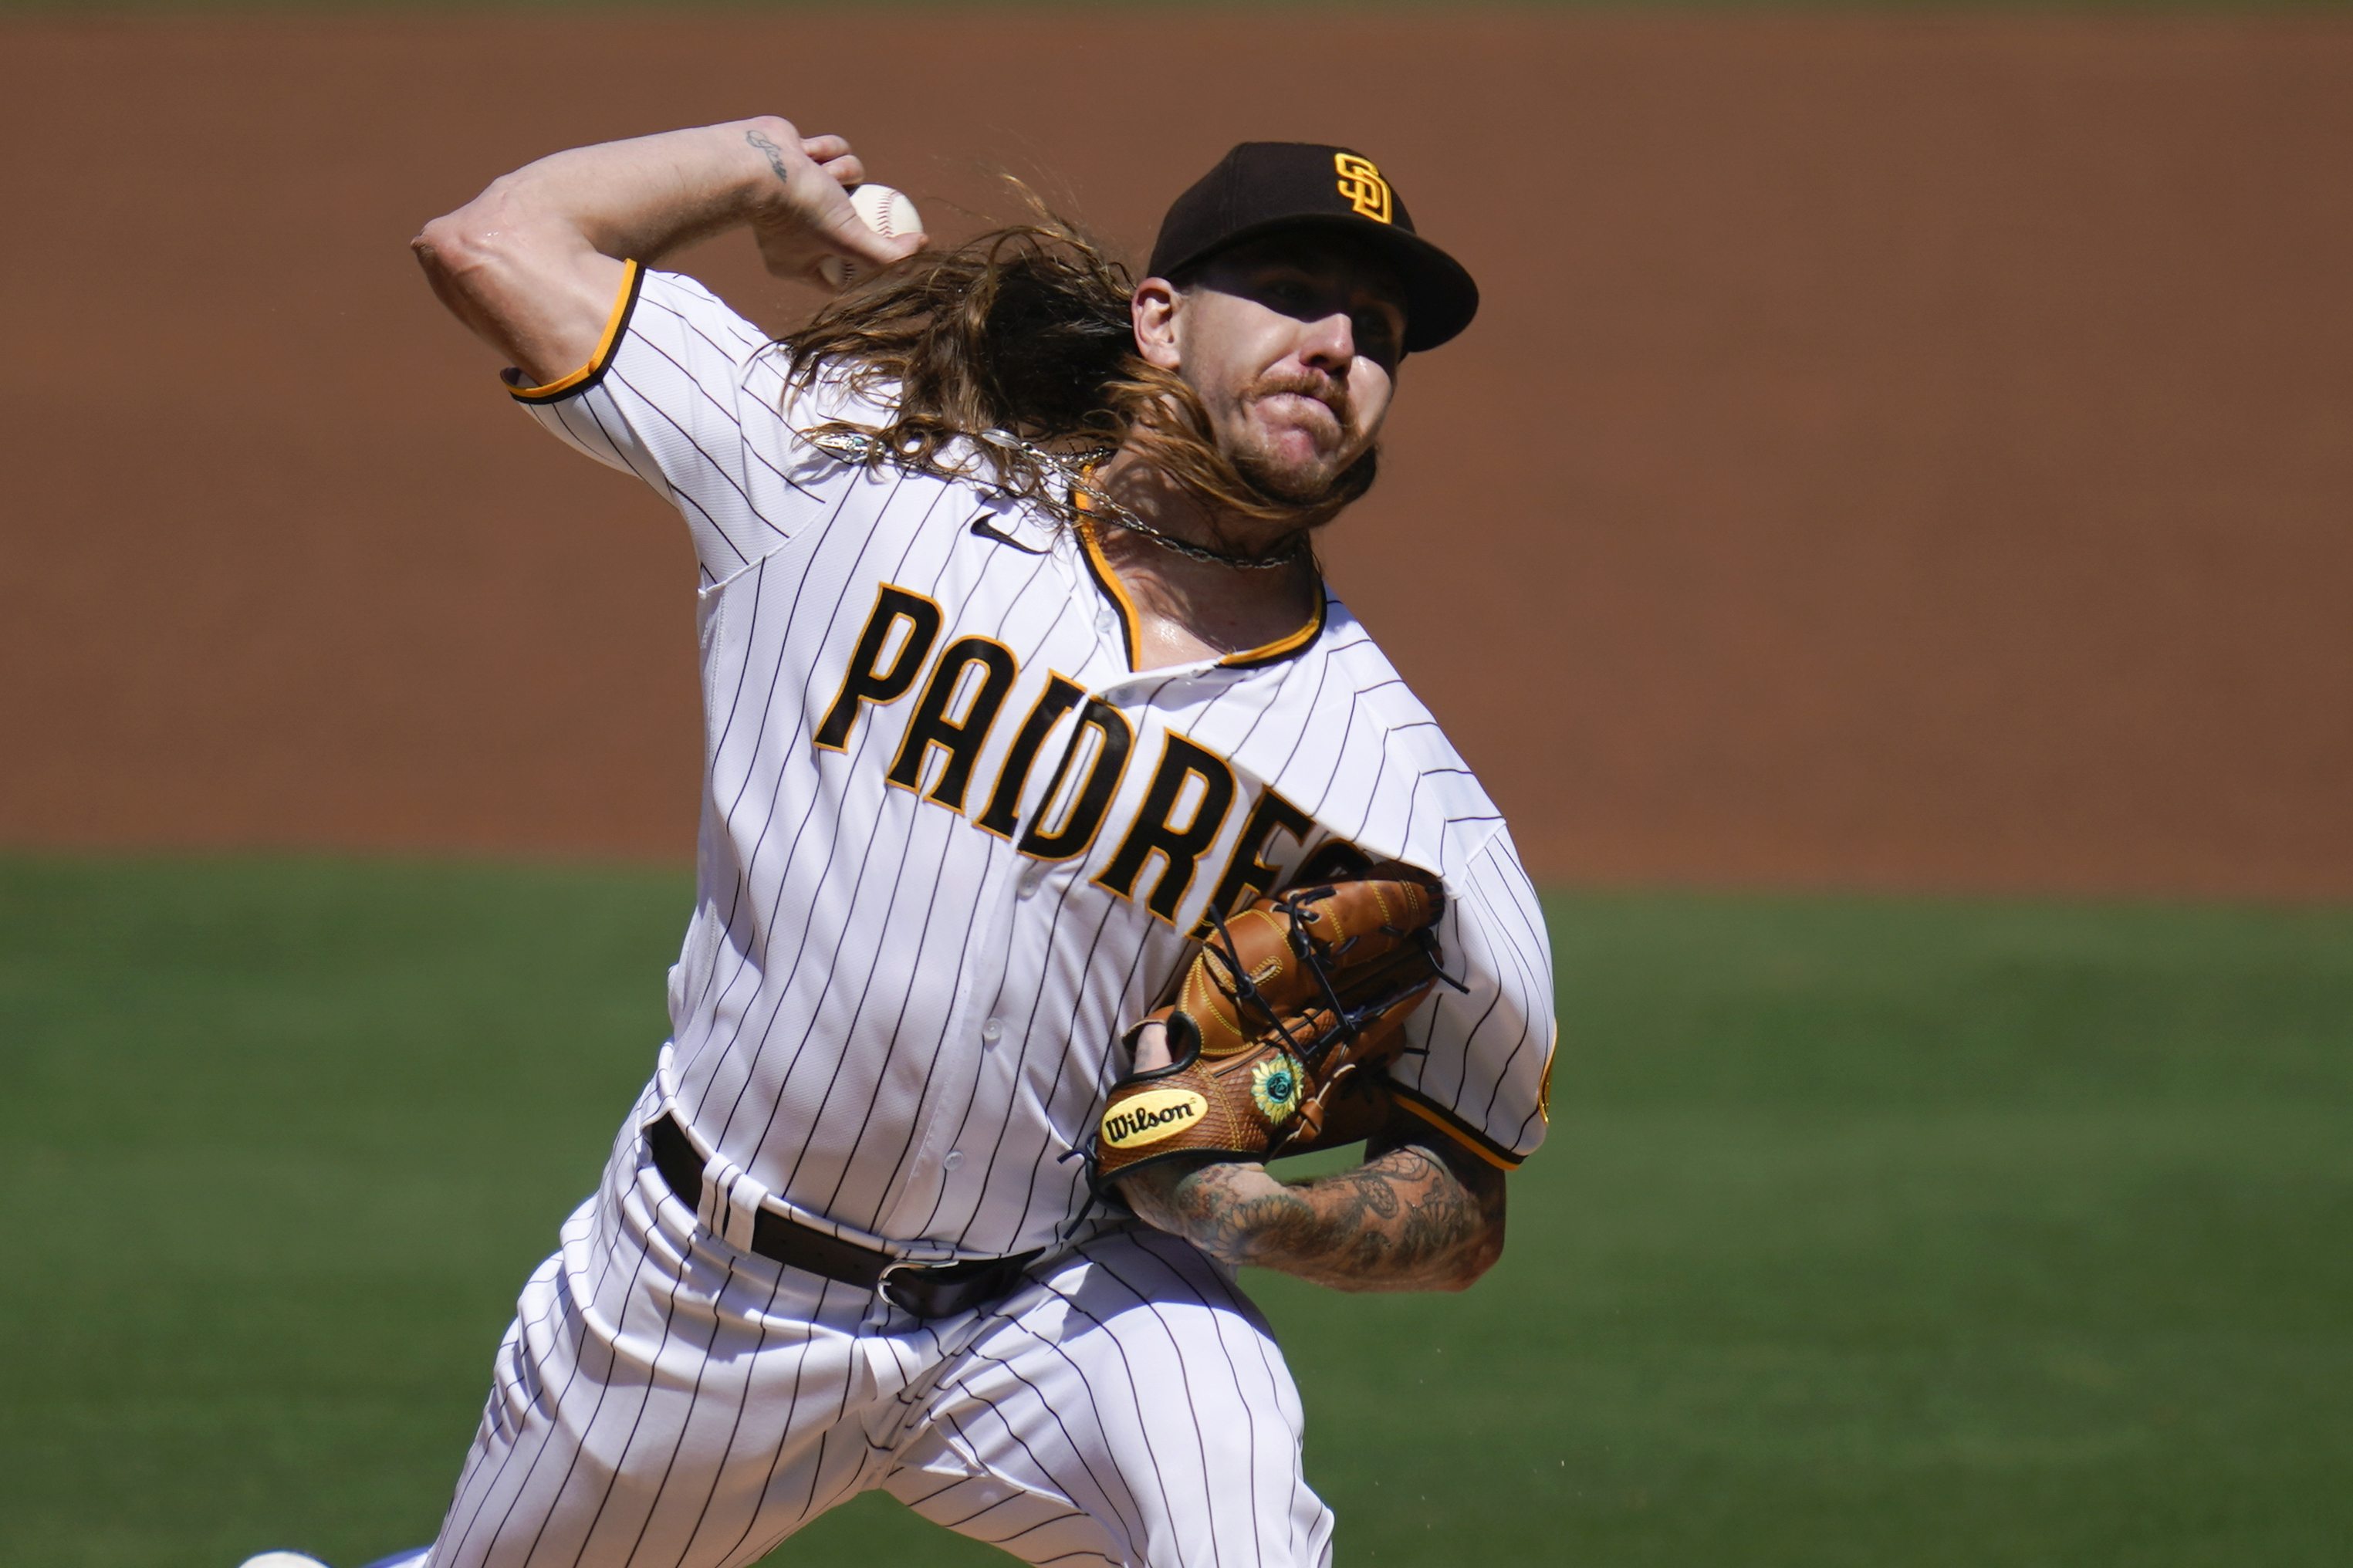 Padres pitcher Mike Clevinger to begin season on IL - Gaslamp Ball